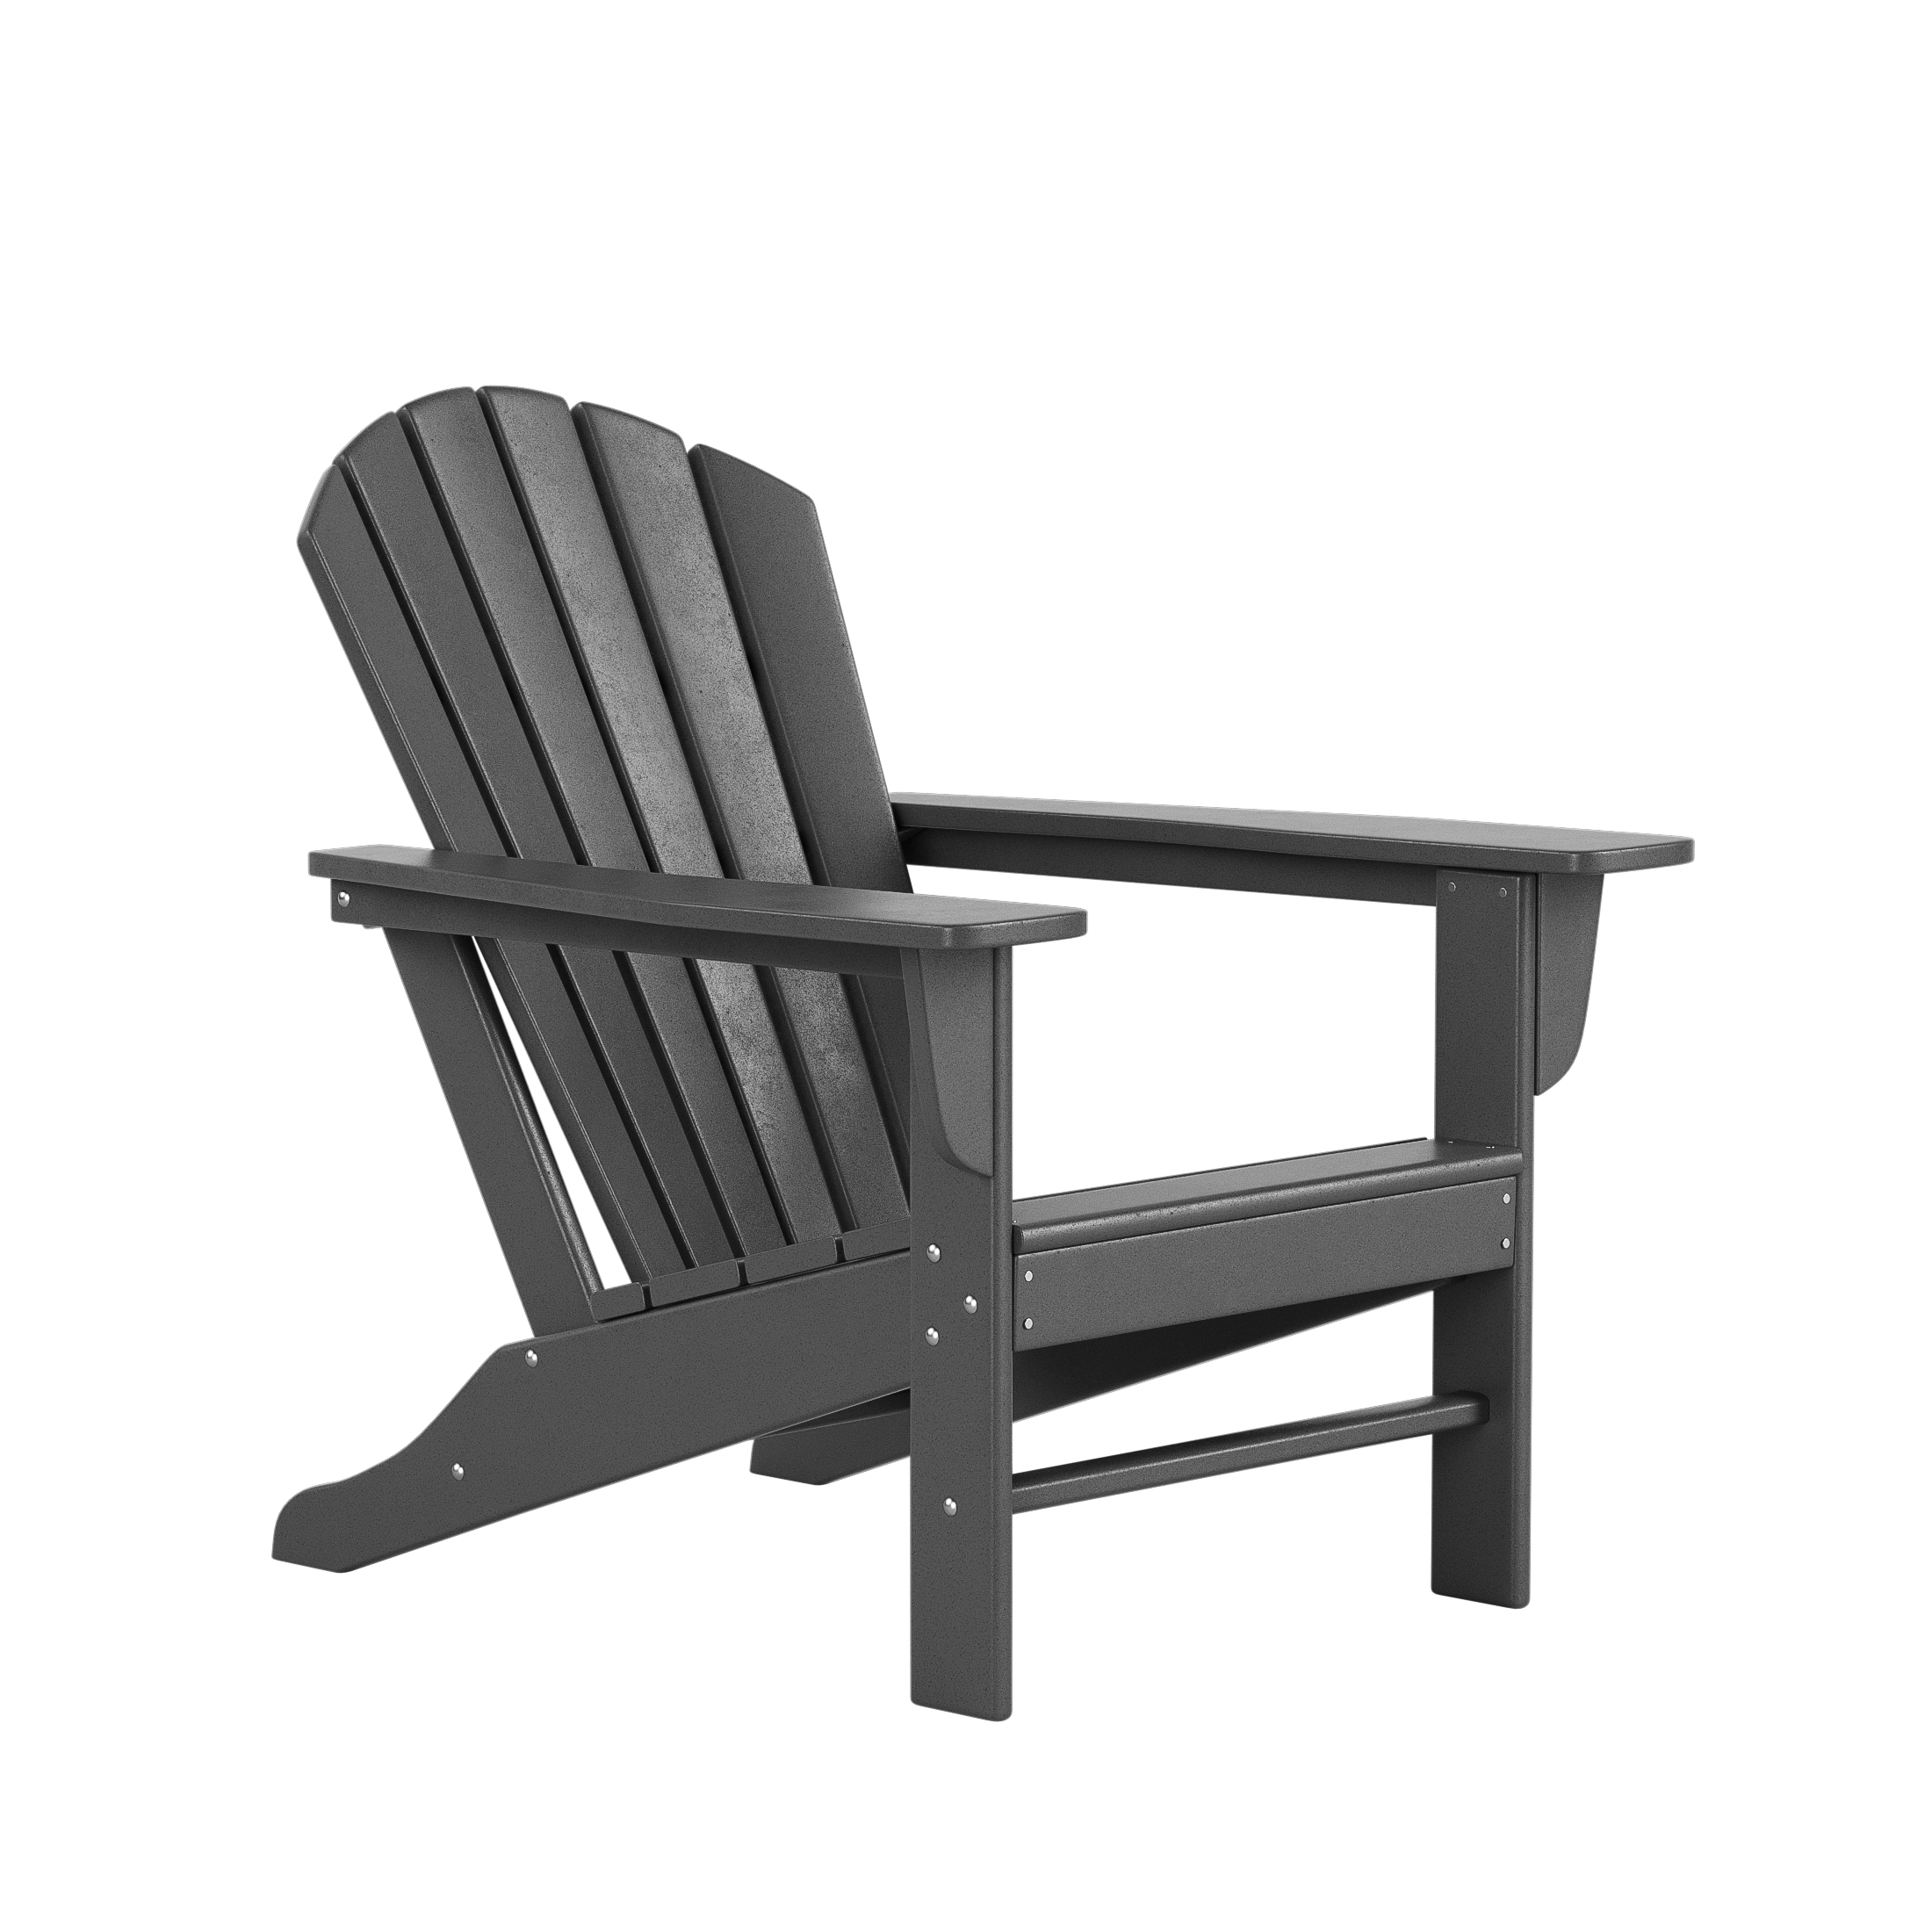 Westin Outdoor with Side Table HDPE Plastic Adirondack Chair - Gray (Set of 2) - image 3 of 5